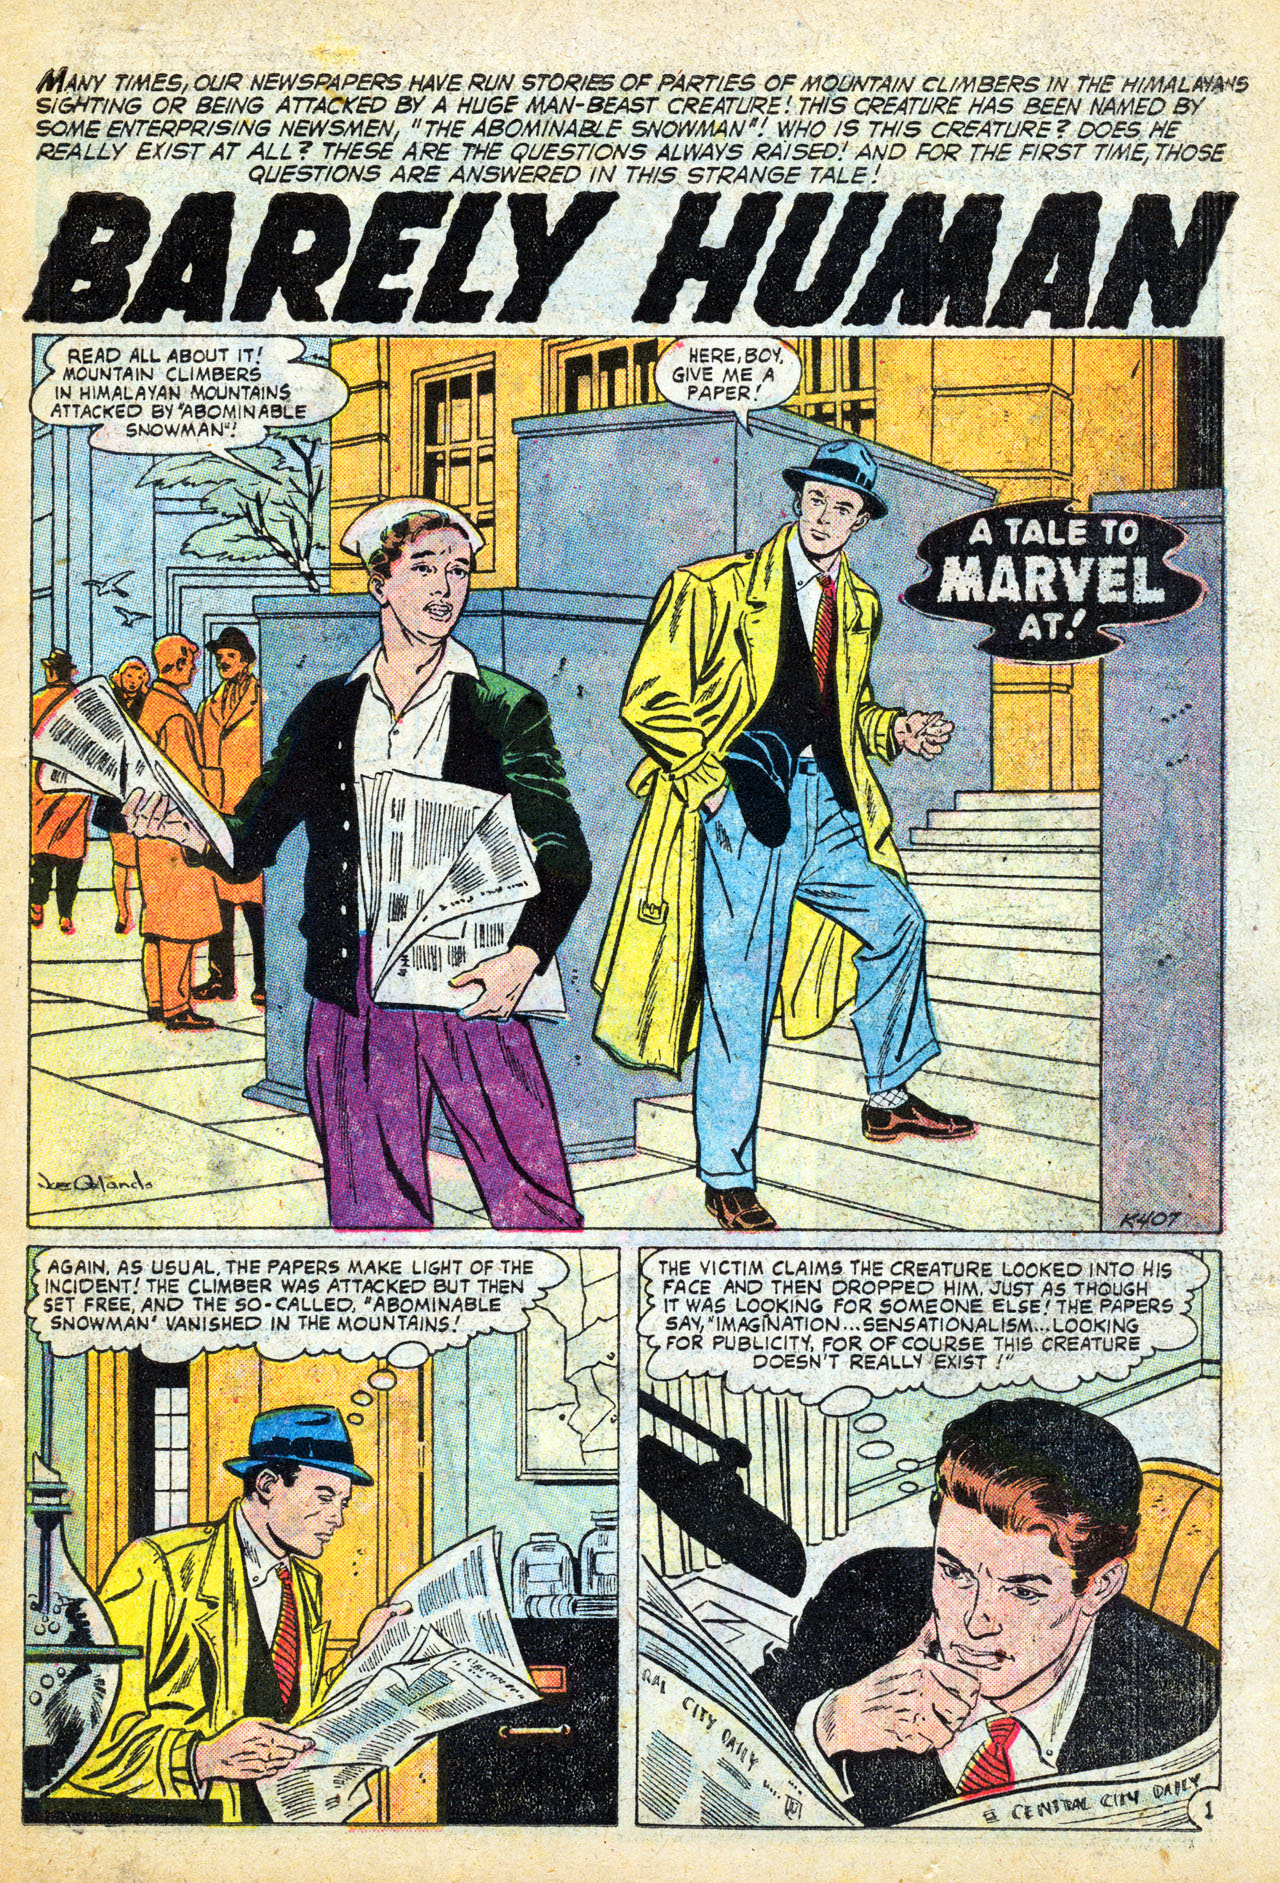 Marvel Tales (1949) 151 Page 2